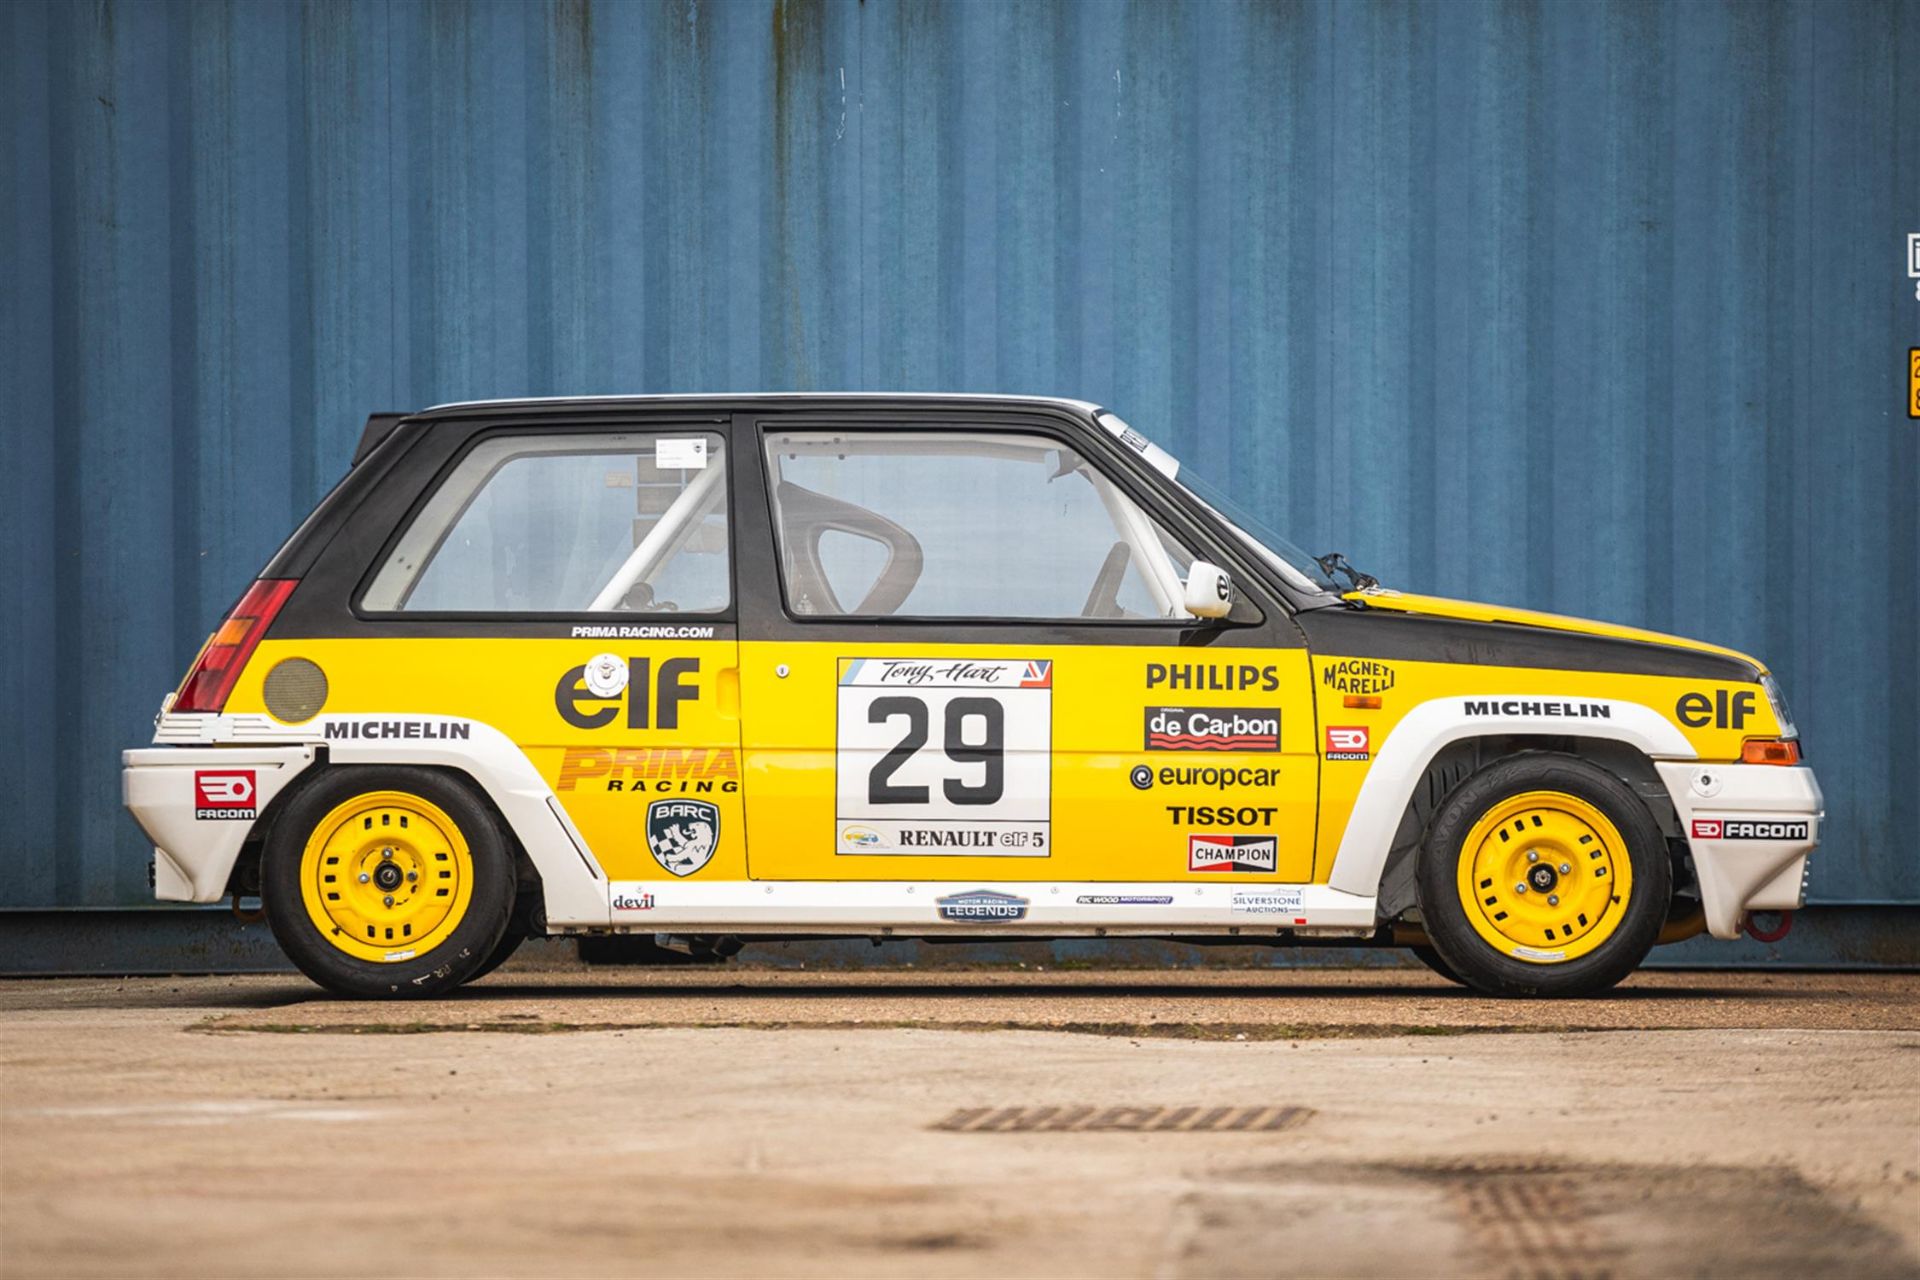 1986 Renault 5 GT Turbo Coupé Historic Touring Car - Image 5 of 10